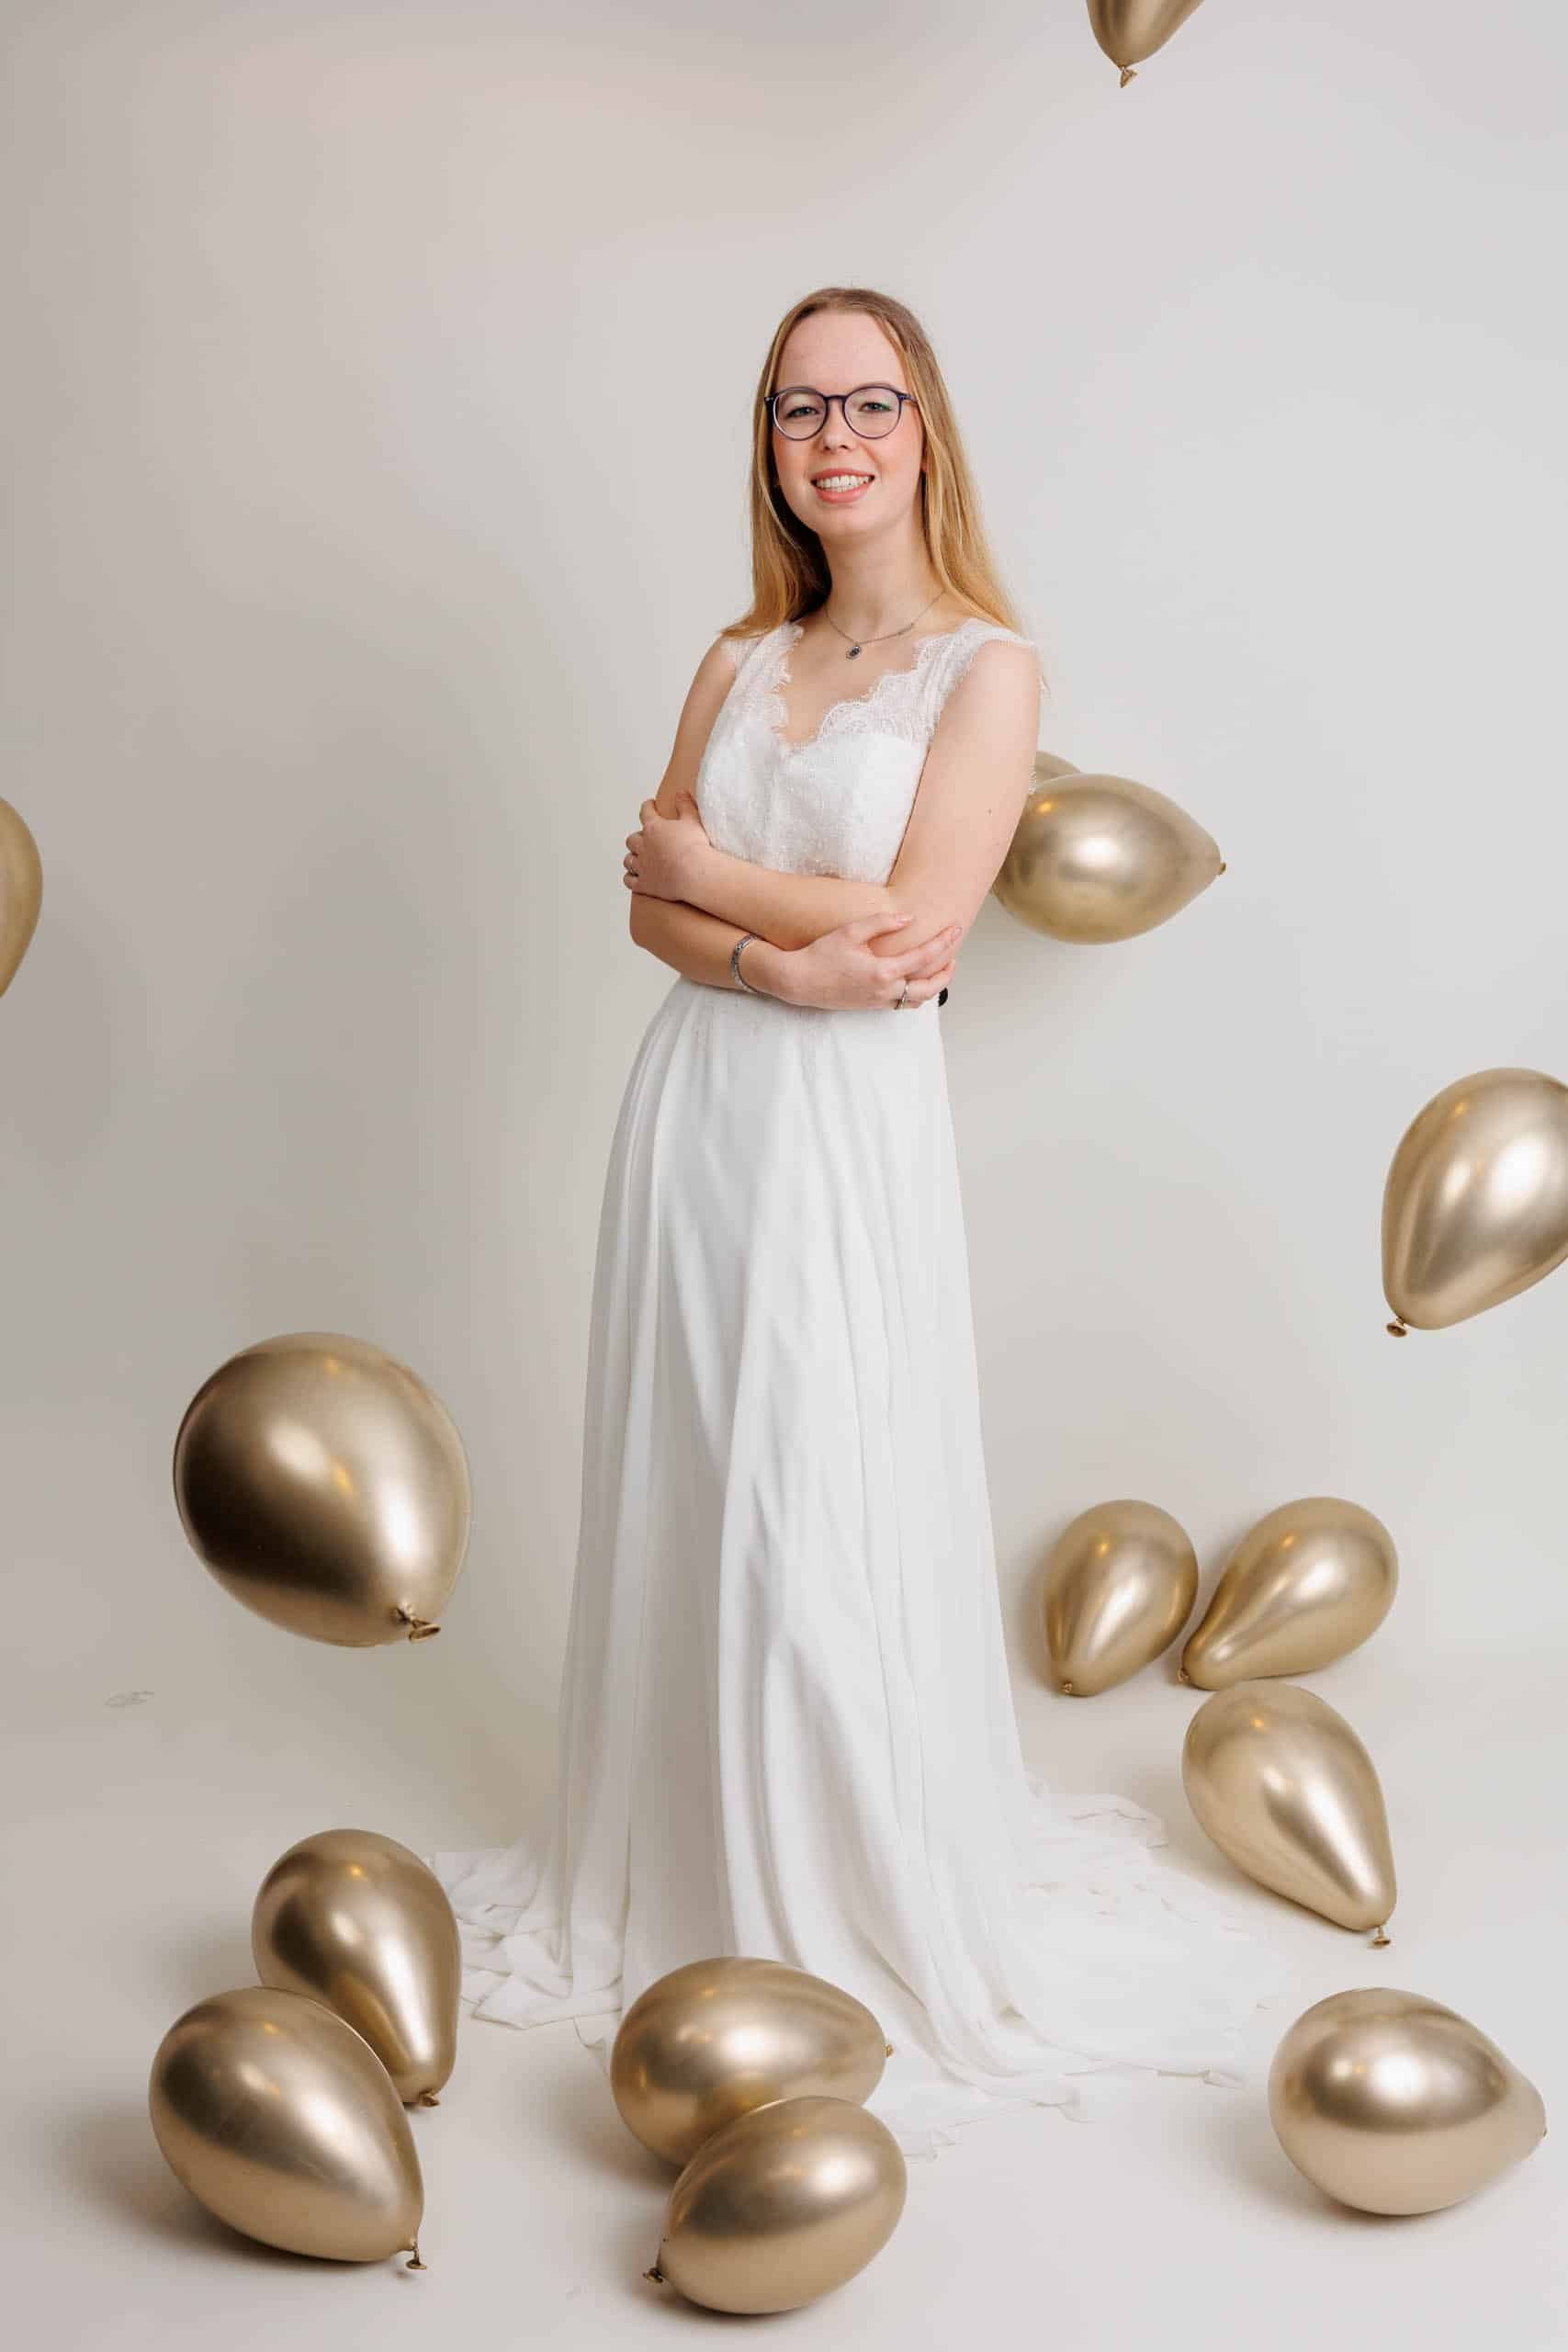 A woman in a wedding dress poses in front of gold balloons while trying on wedding dresses for fun.